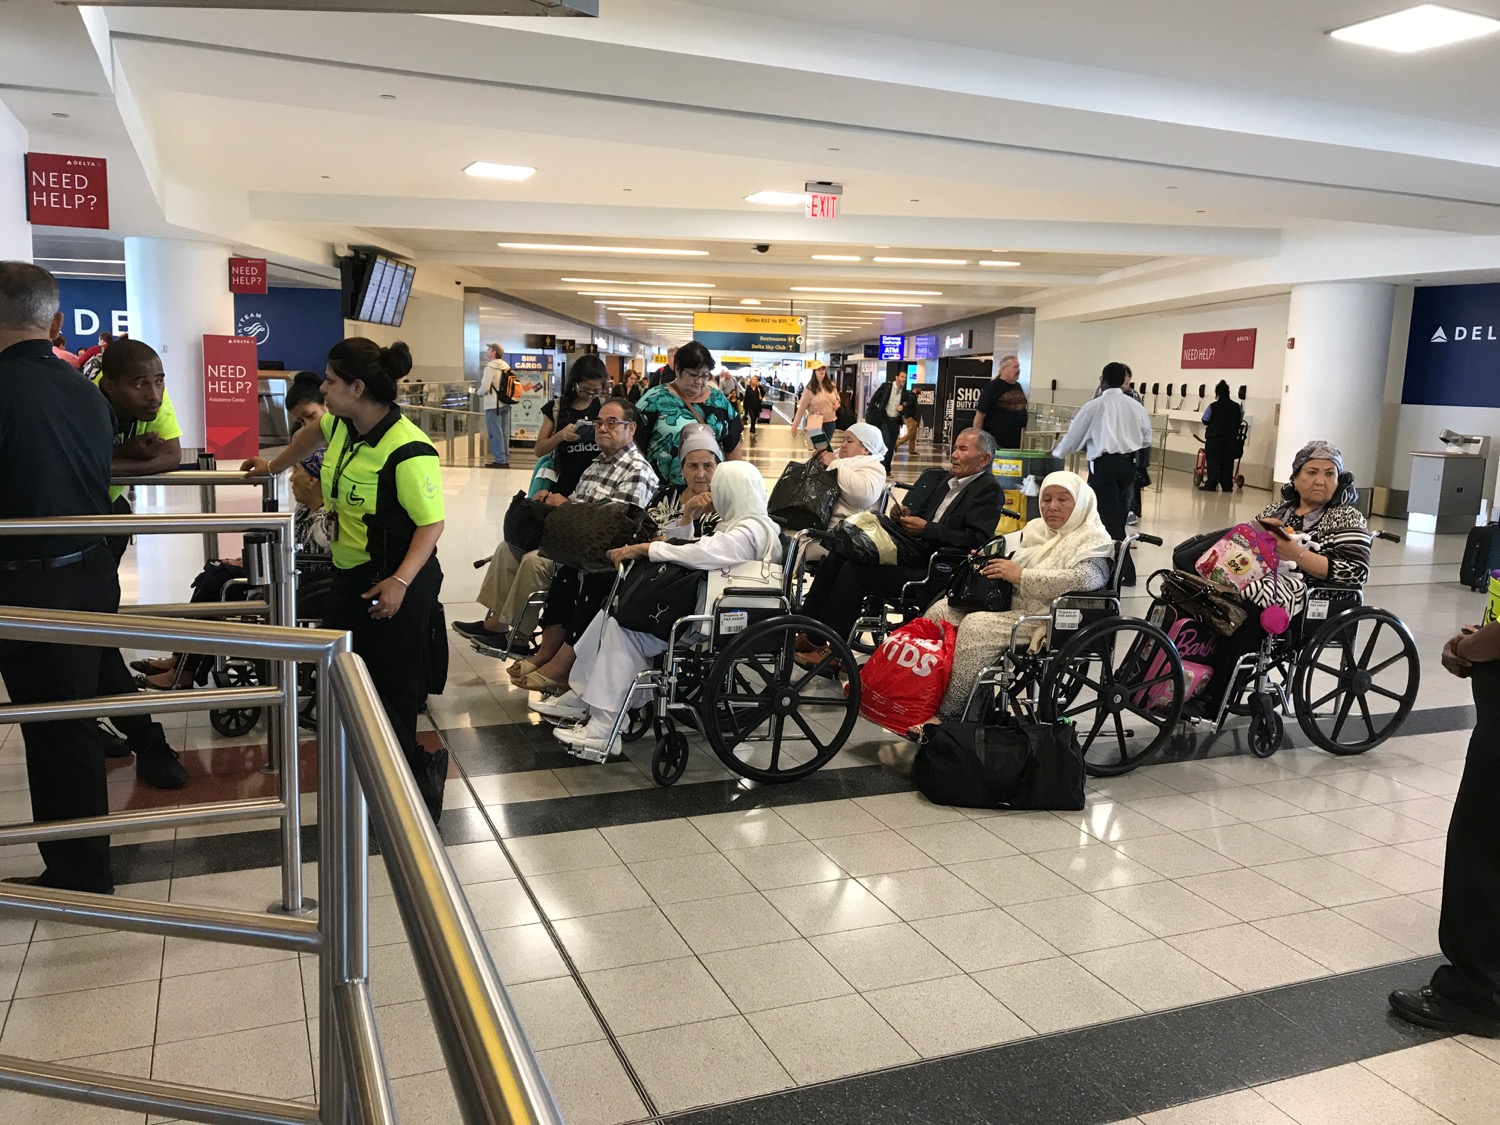 a group of people in wheelchairs in an airport